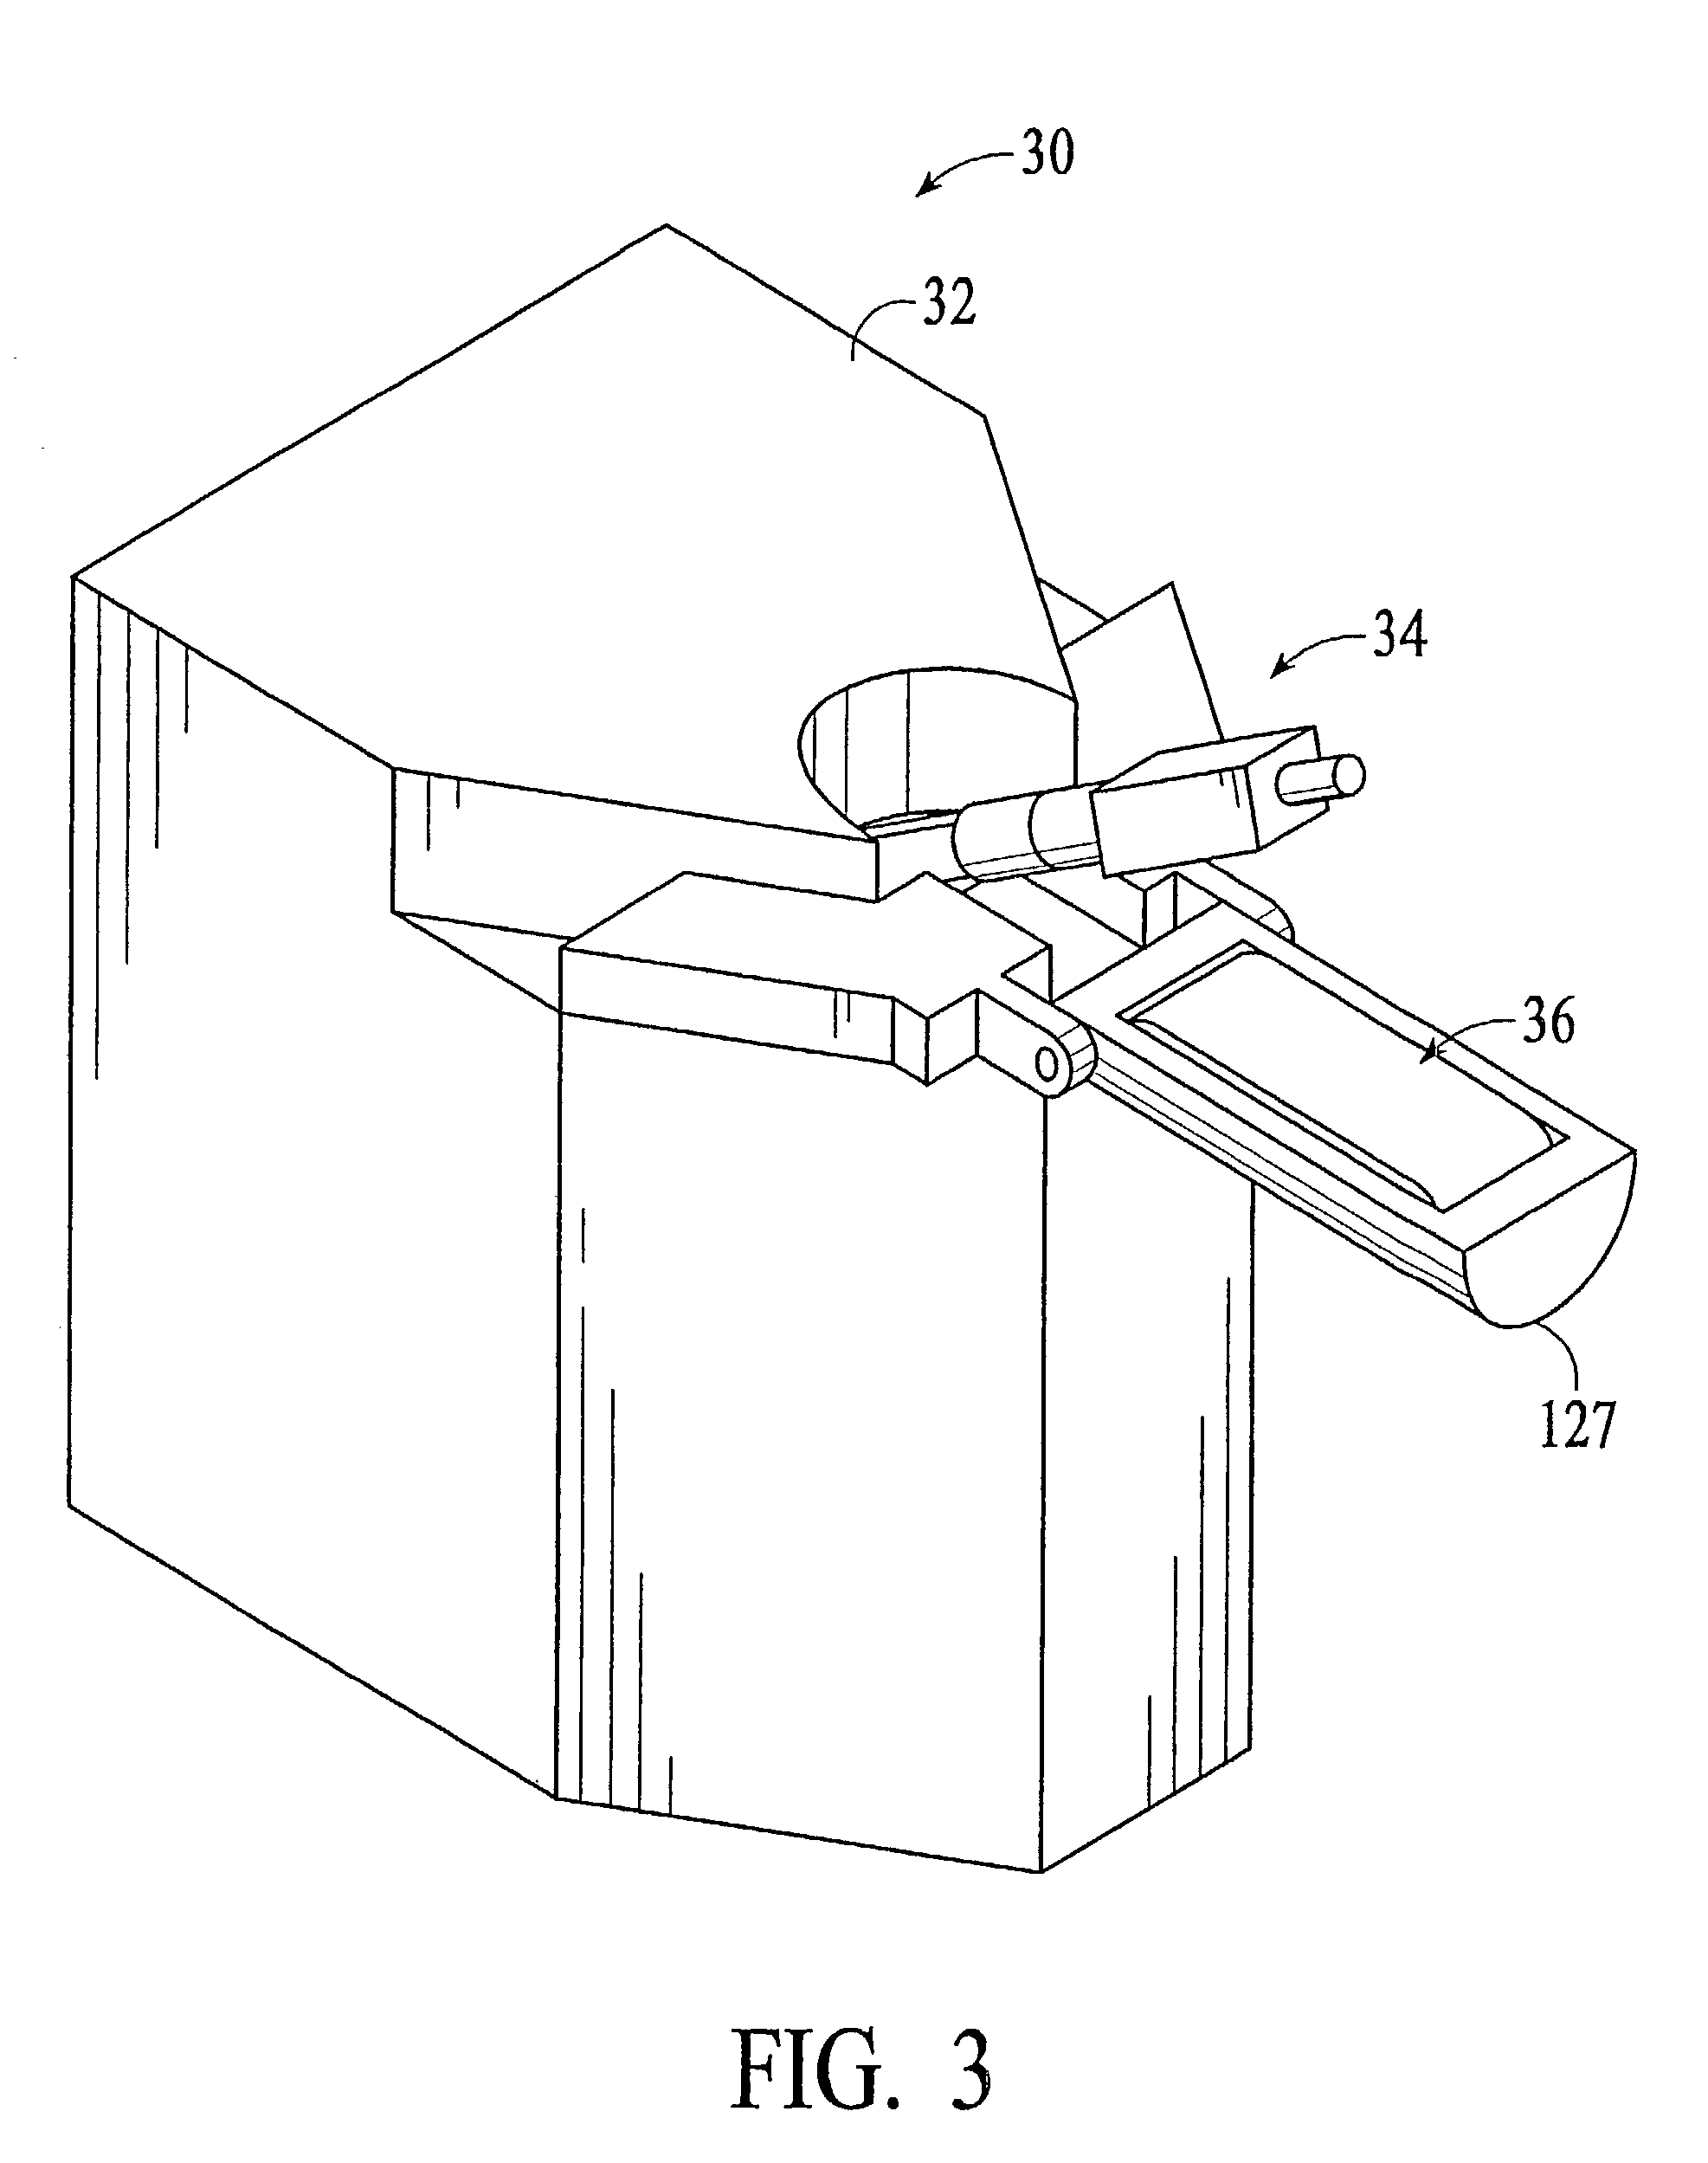 Interface device and method for interfacing instruments to vascular access simulation systems